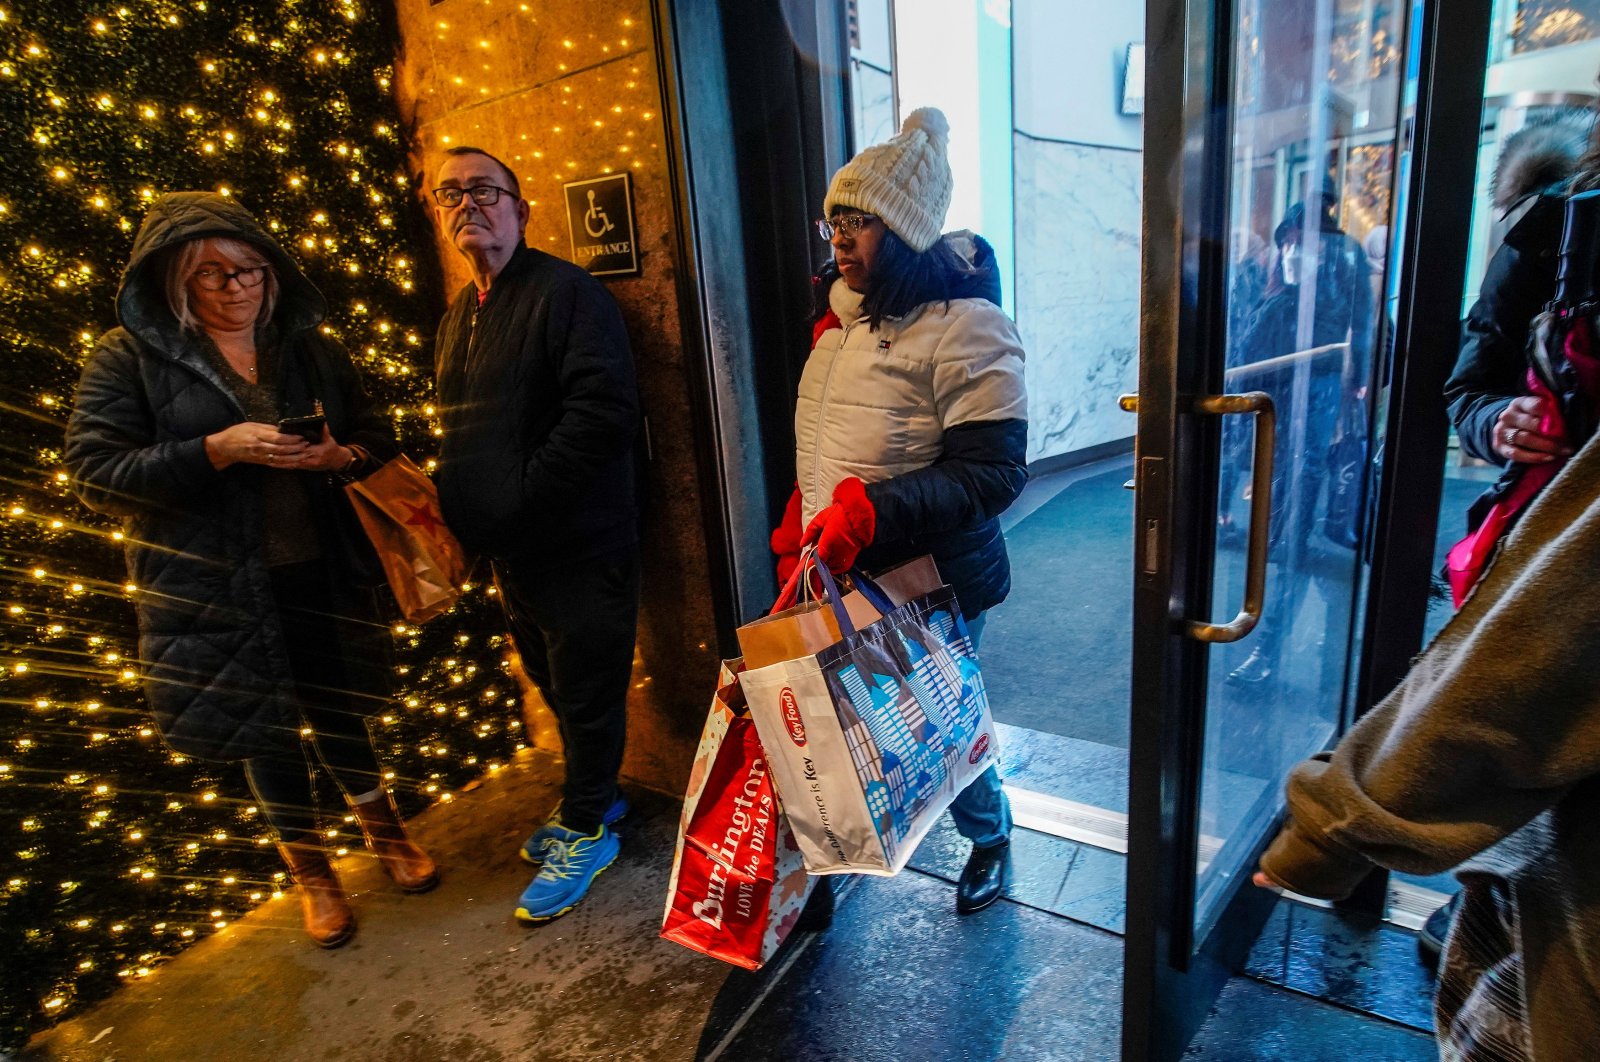 People carrying shopping bags exit a retail store during the holiday season in New York City, U.S., Dec. 15, 2022. (Reuters Photo)